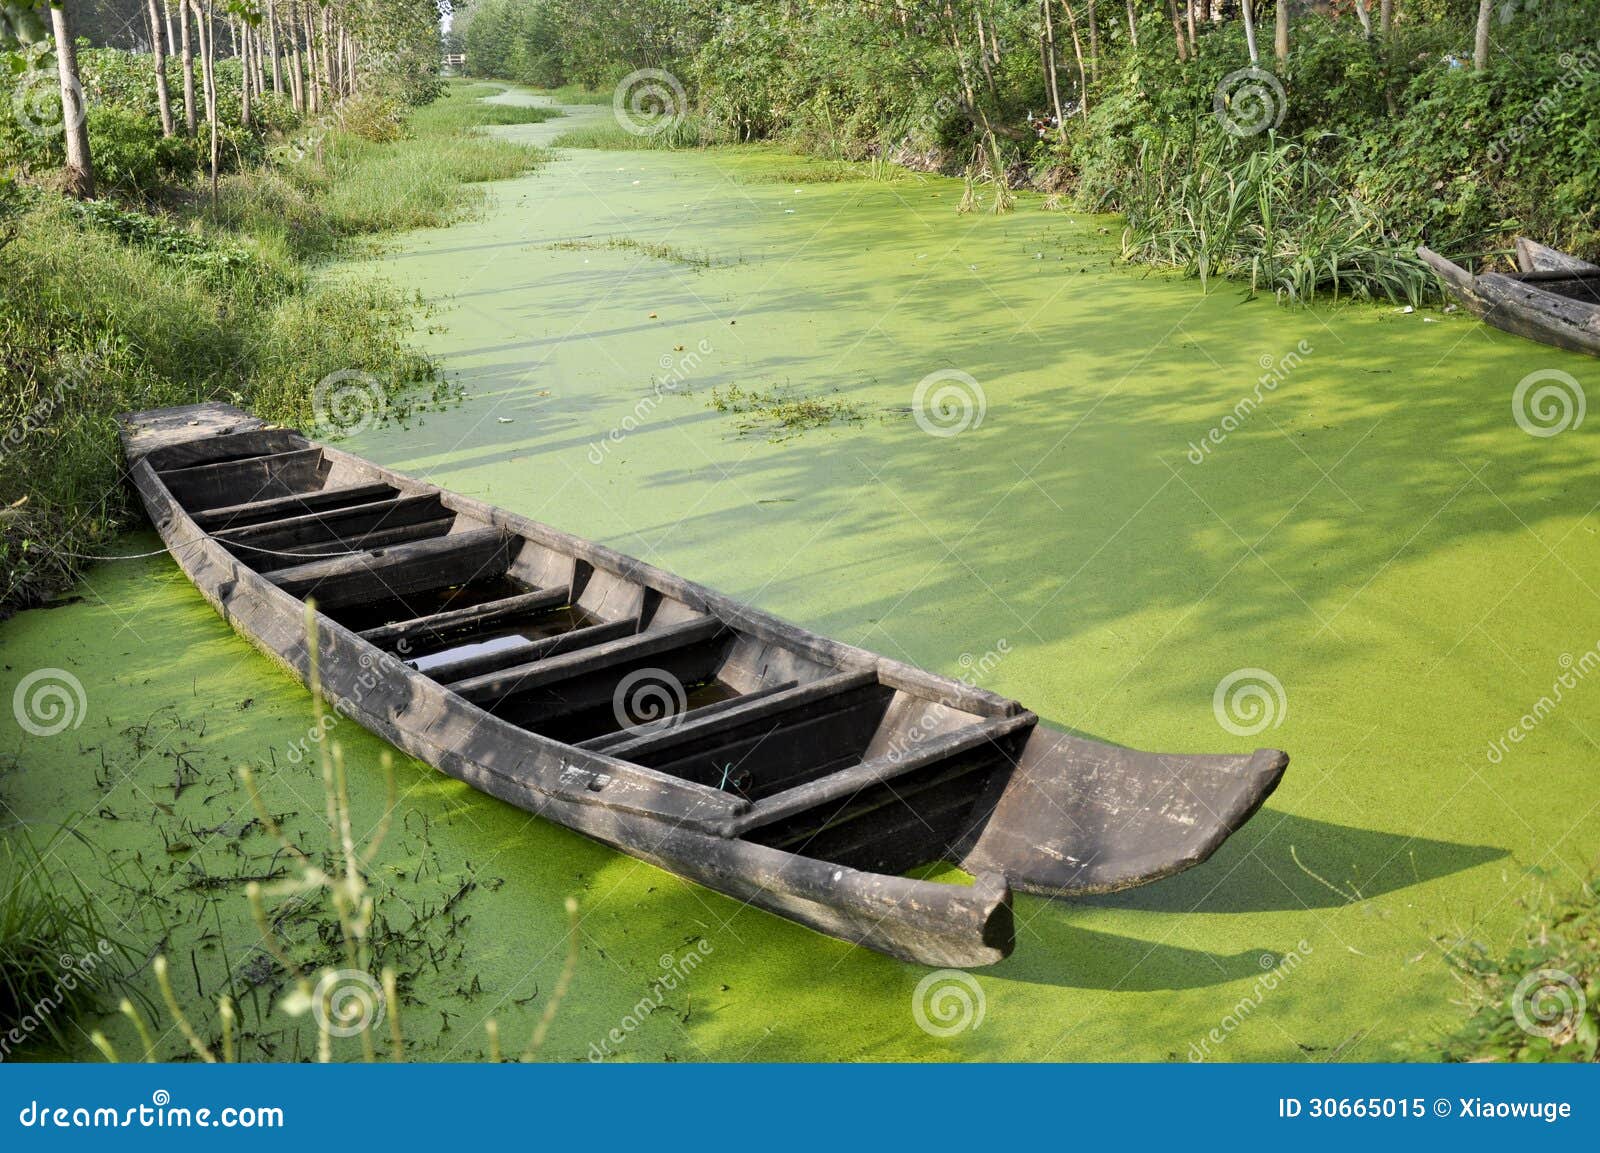 Wooden boat on the water ancient asia autumn beautiful boat china color colorful connection craft dingy drift environment era fall floating grass green